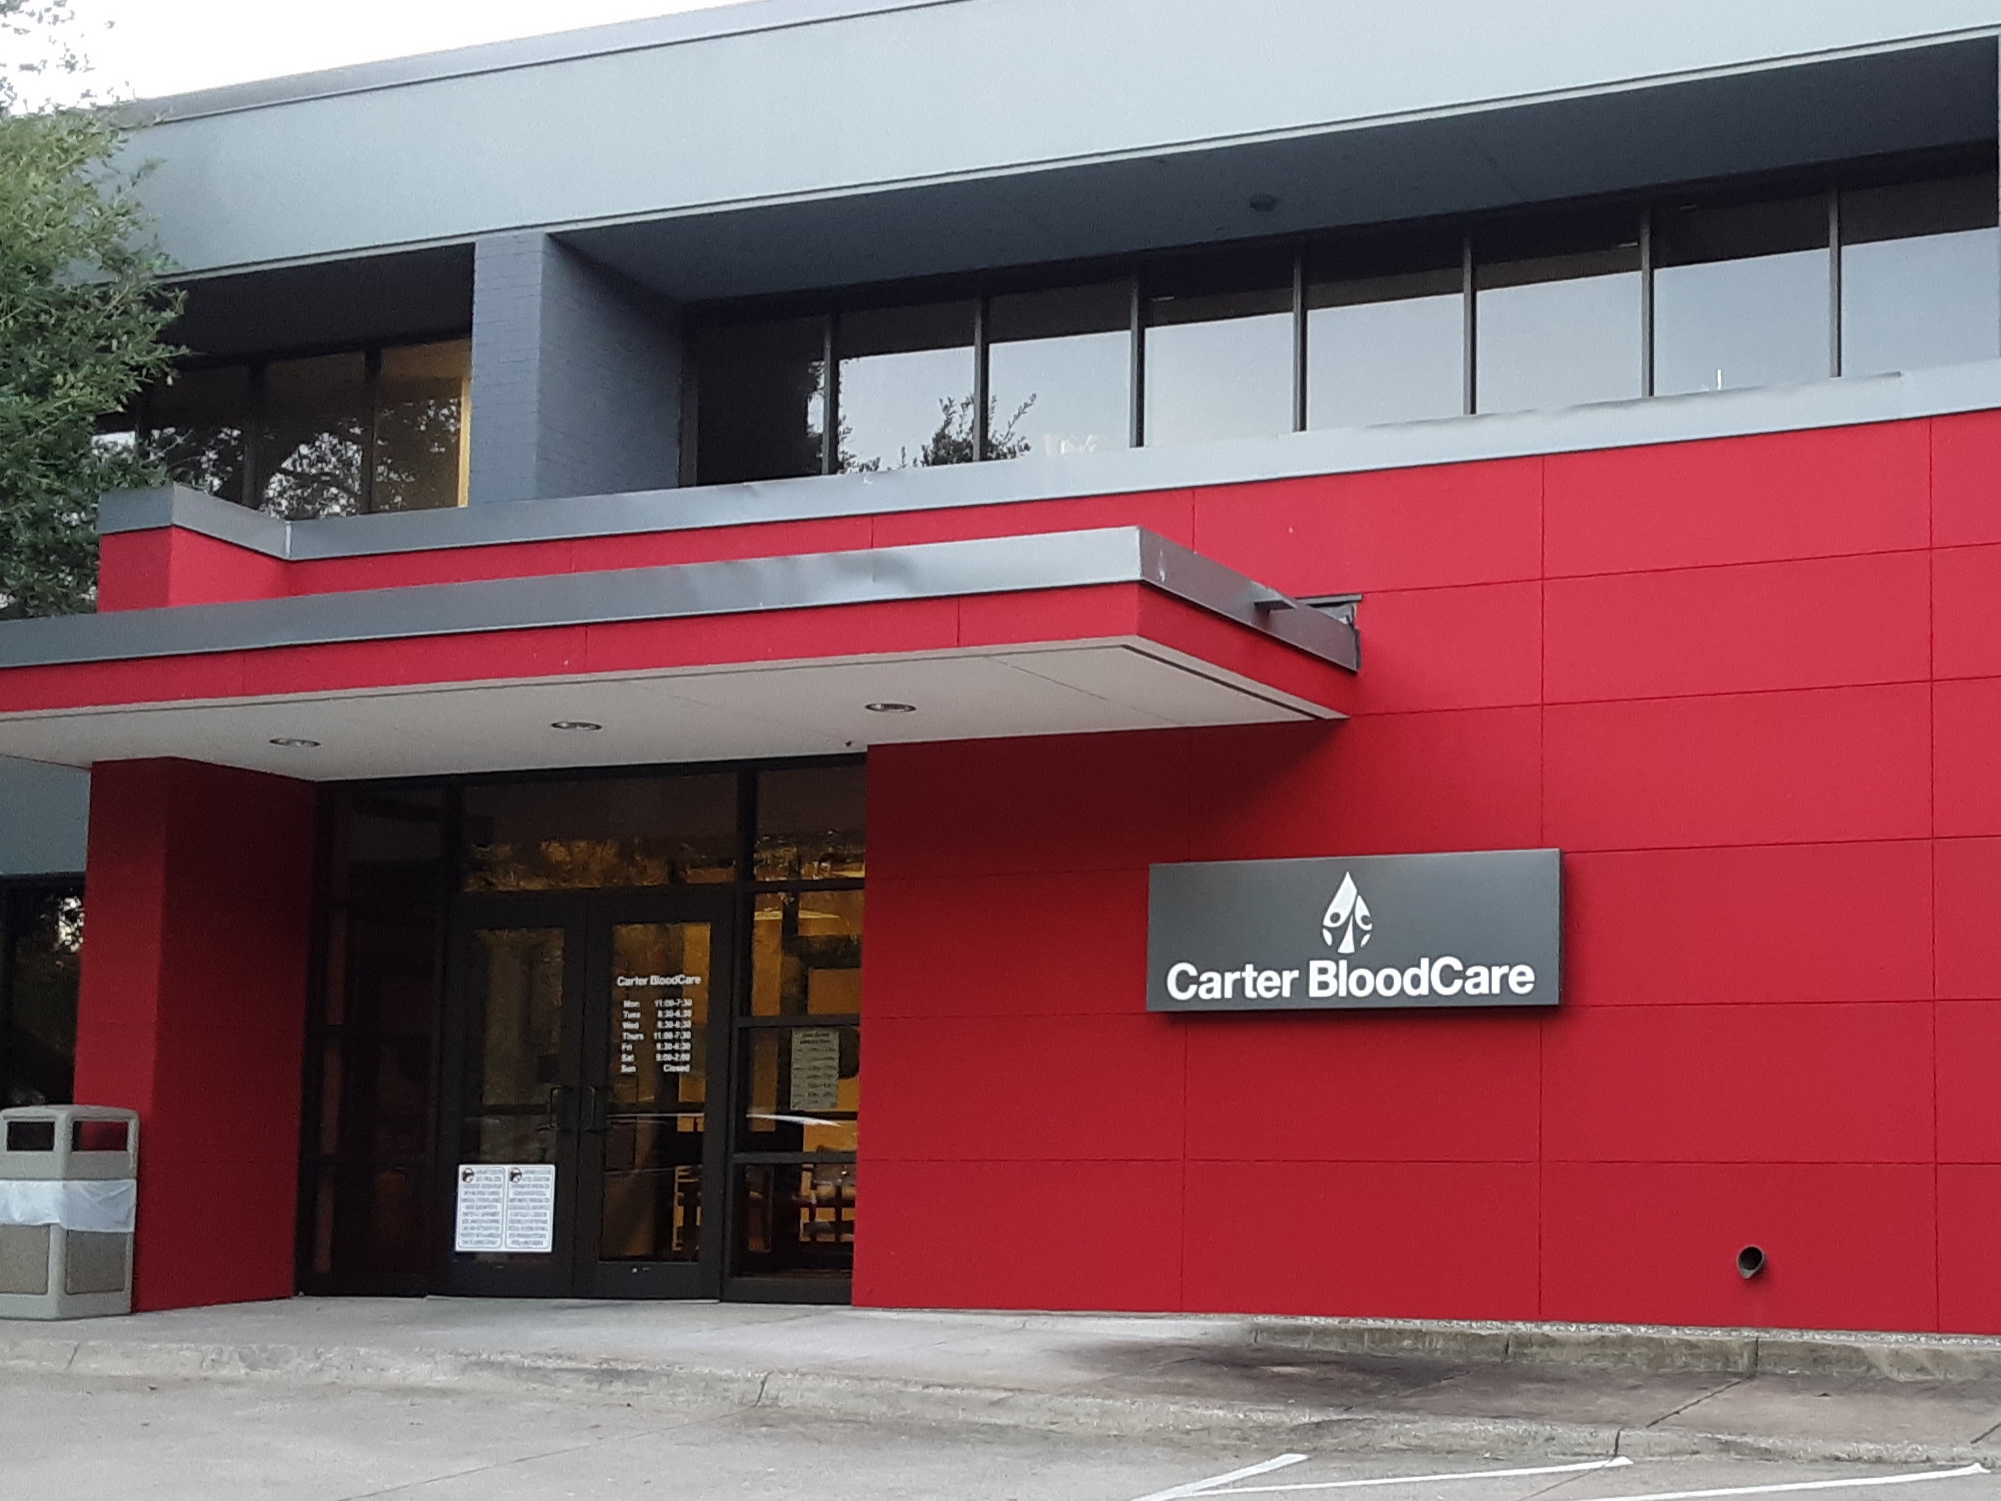 Carter BloodCare Entrance and sign